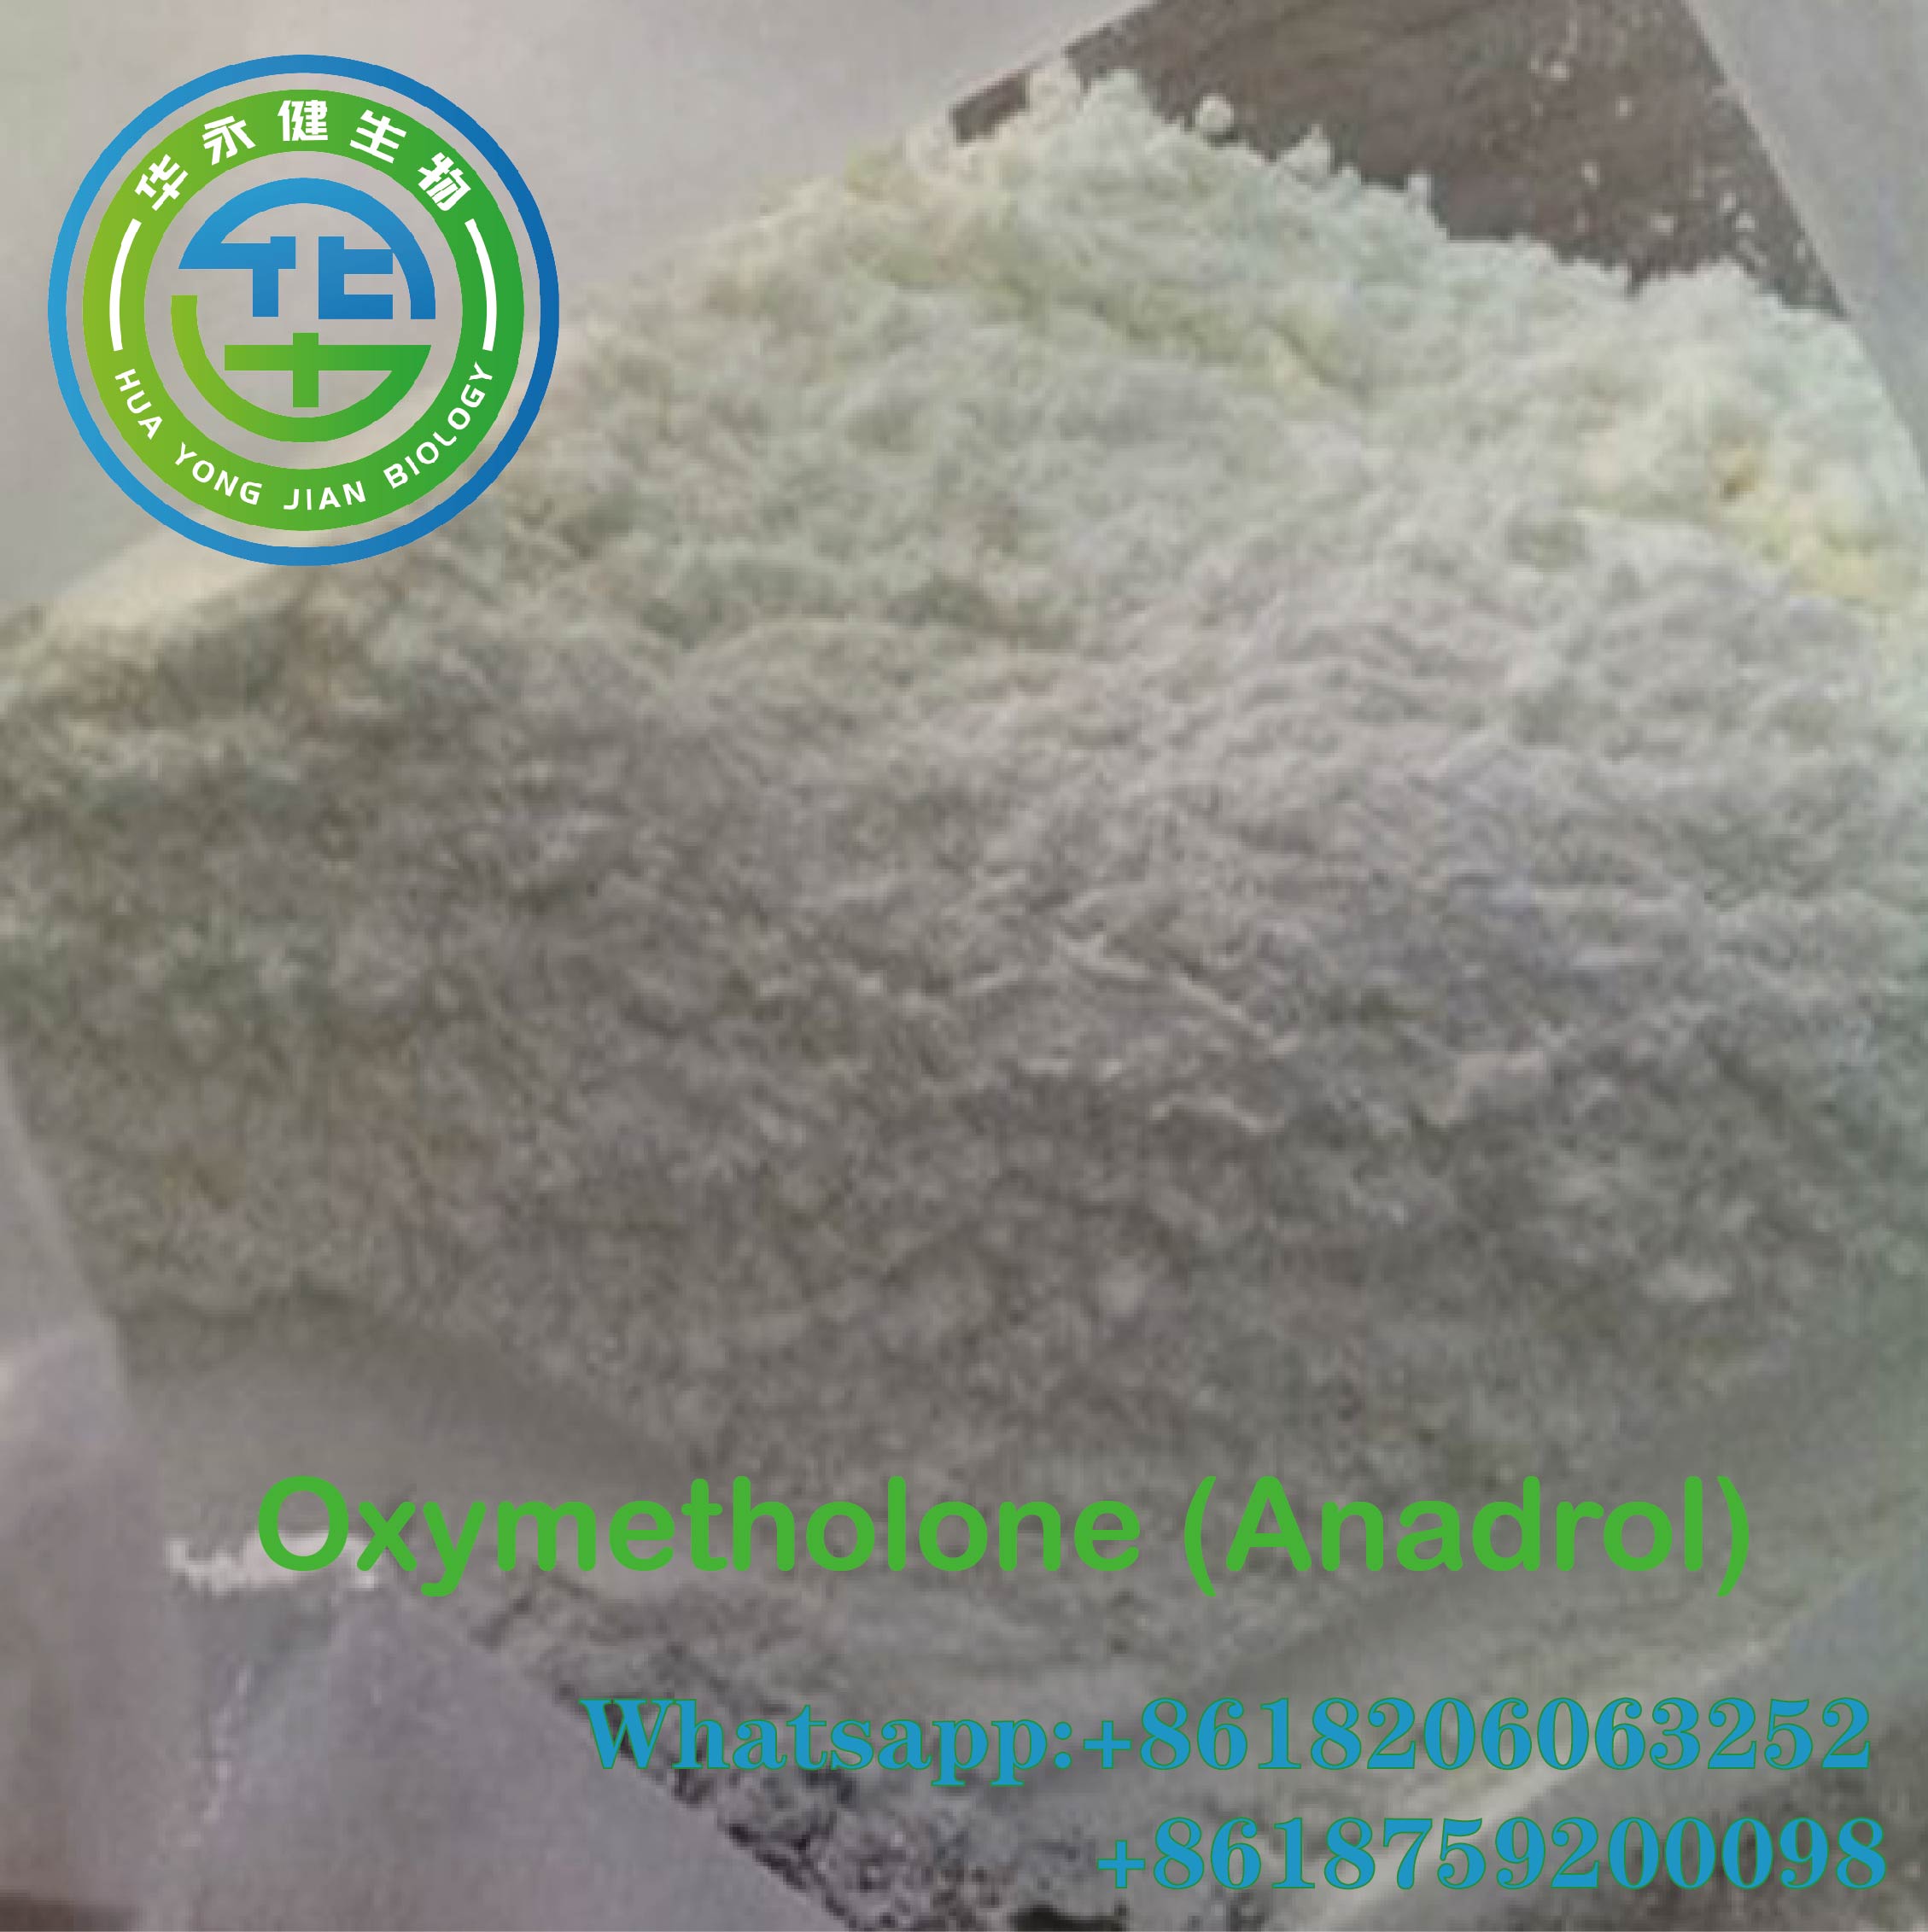 Protein synthesisAnadrol oral progesterone Oxymetholone Steroid Supplements OXY Muscle GrowthCAS 434-07-1 Featured Image